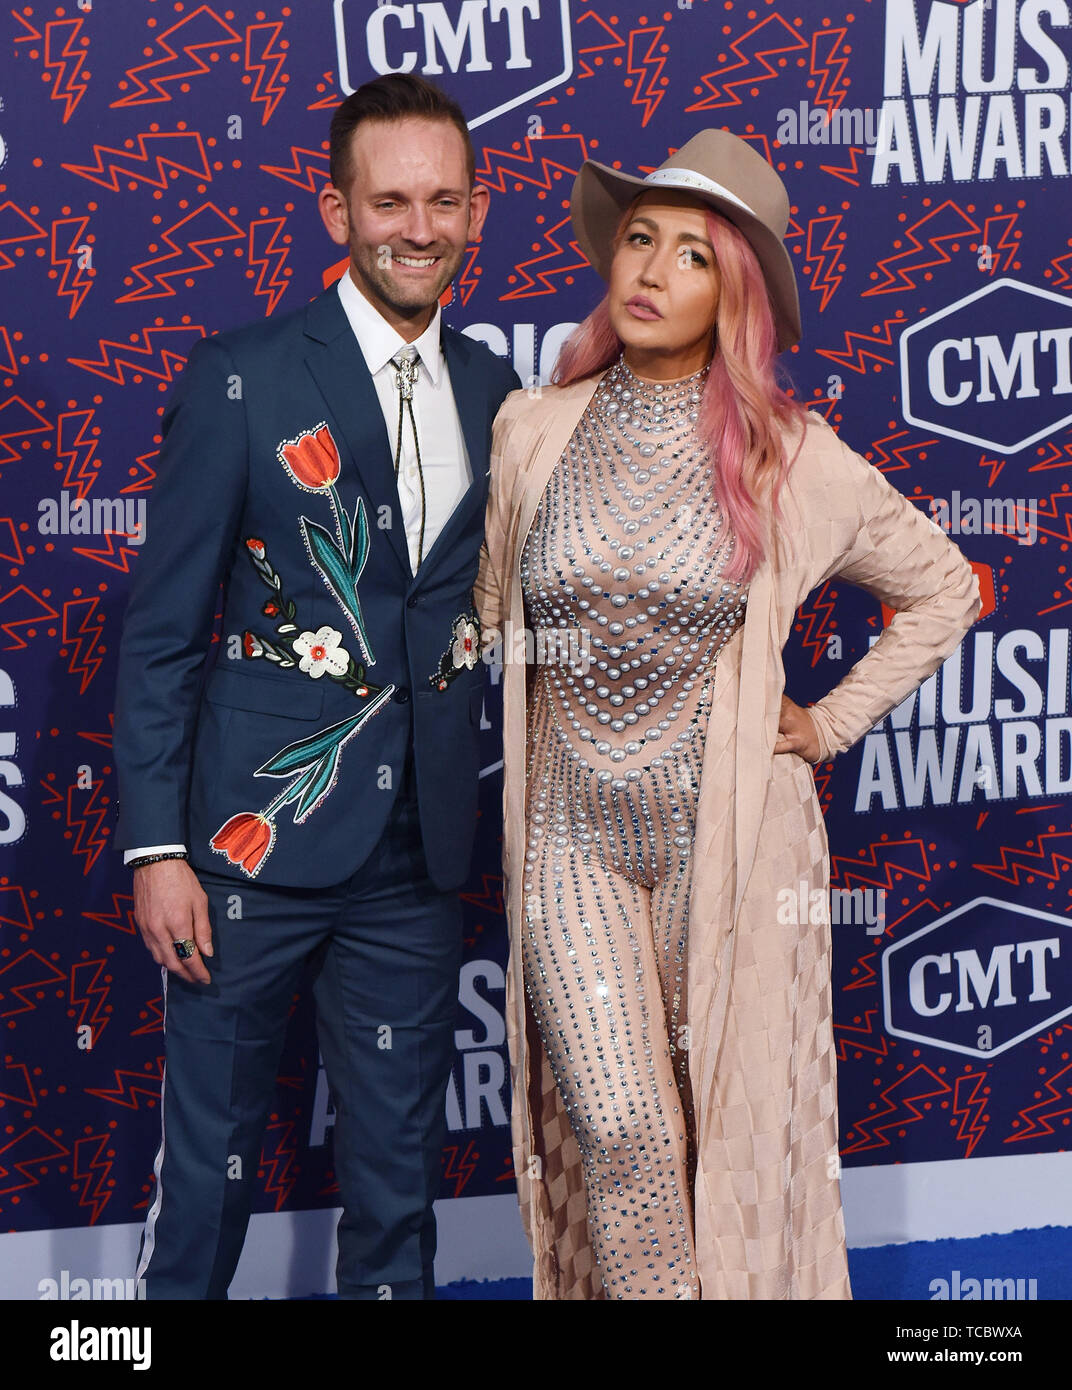 NASHVILLE, TENNESSEE - JUNE 05: Meghan Linsey, Tyler Cain attend the ...